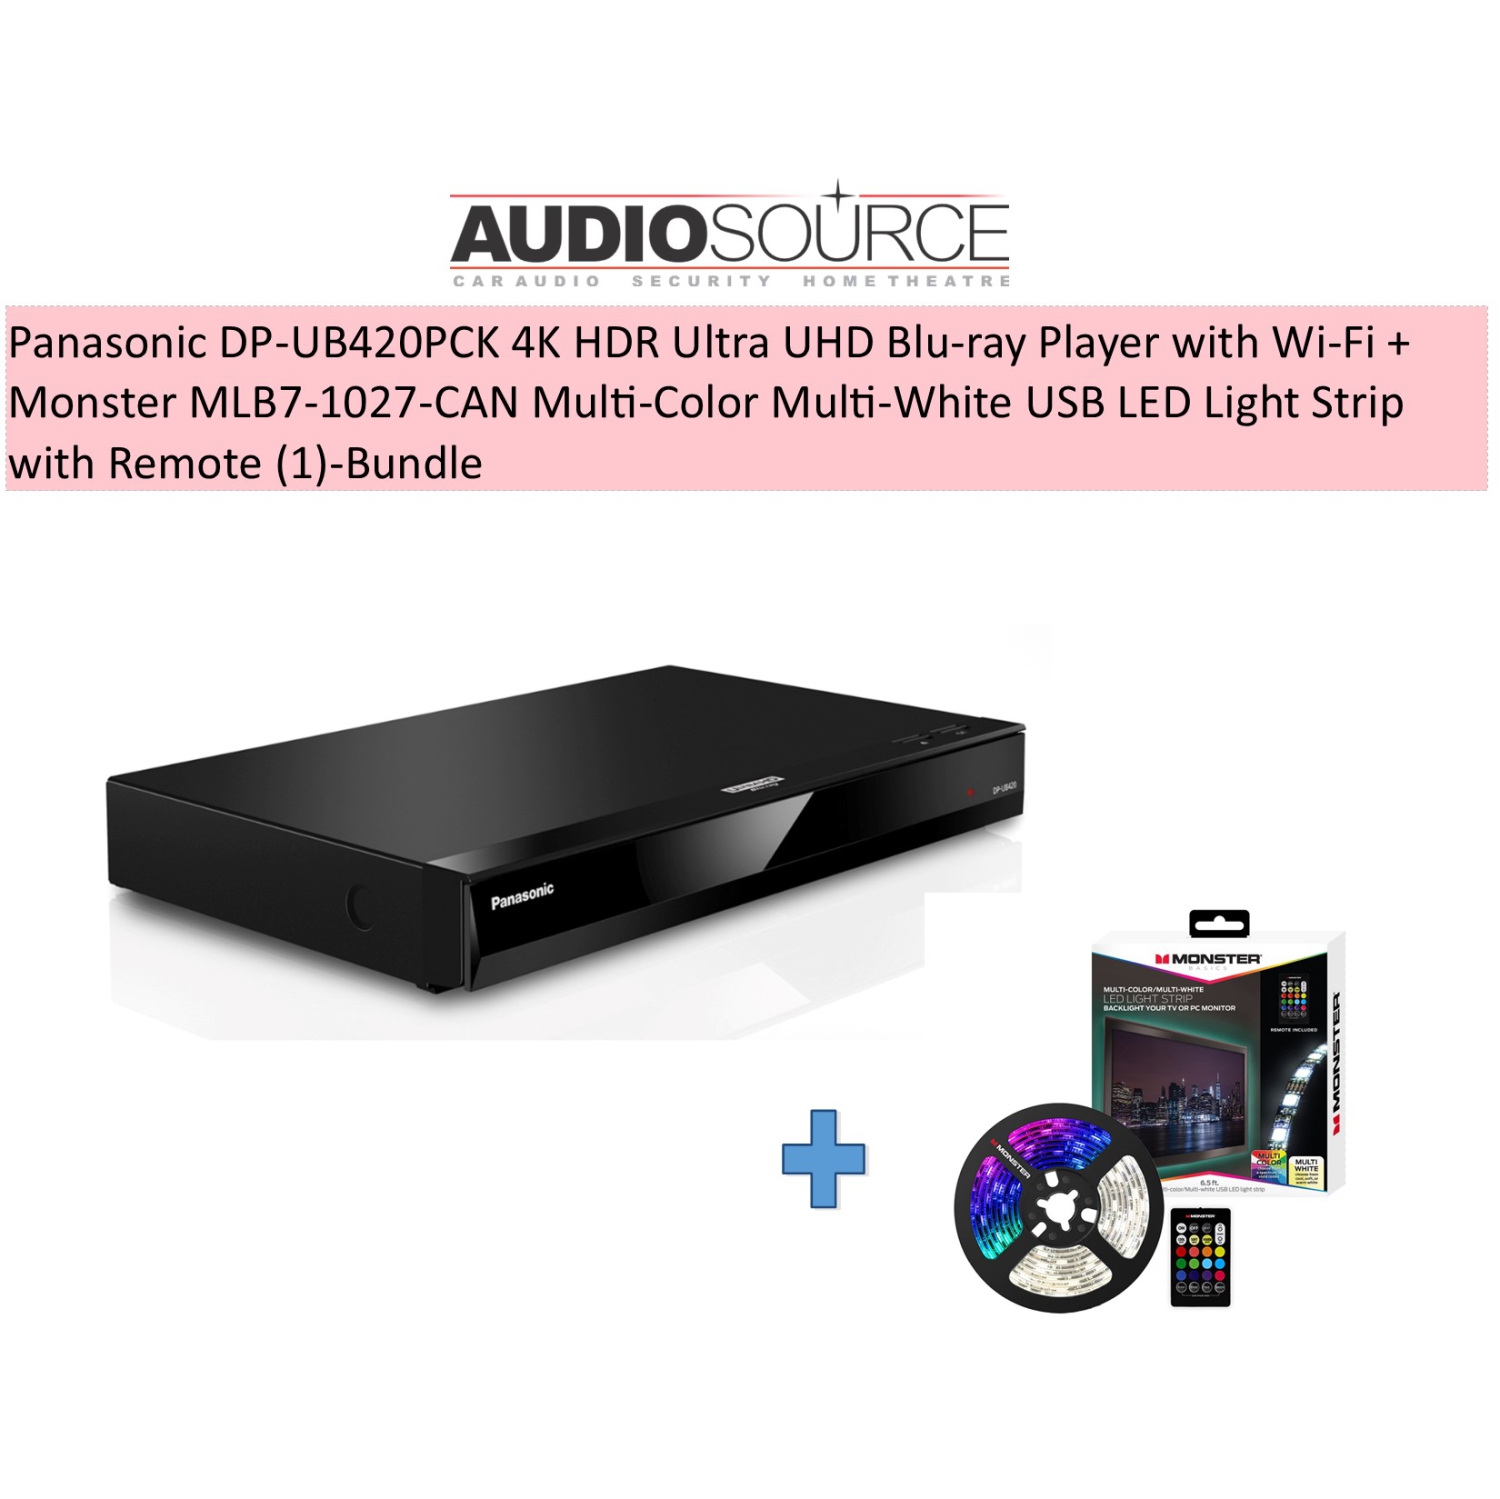 Panasonic DP-UB420PCK 4K HDR Ultra UHD Blu-ray Player with Wi-Fi + Monster MLB7-1027-CAN Multi-Color Multi-White USB LED Light Strip with Remote (1)-Bundle